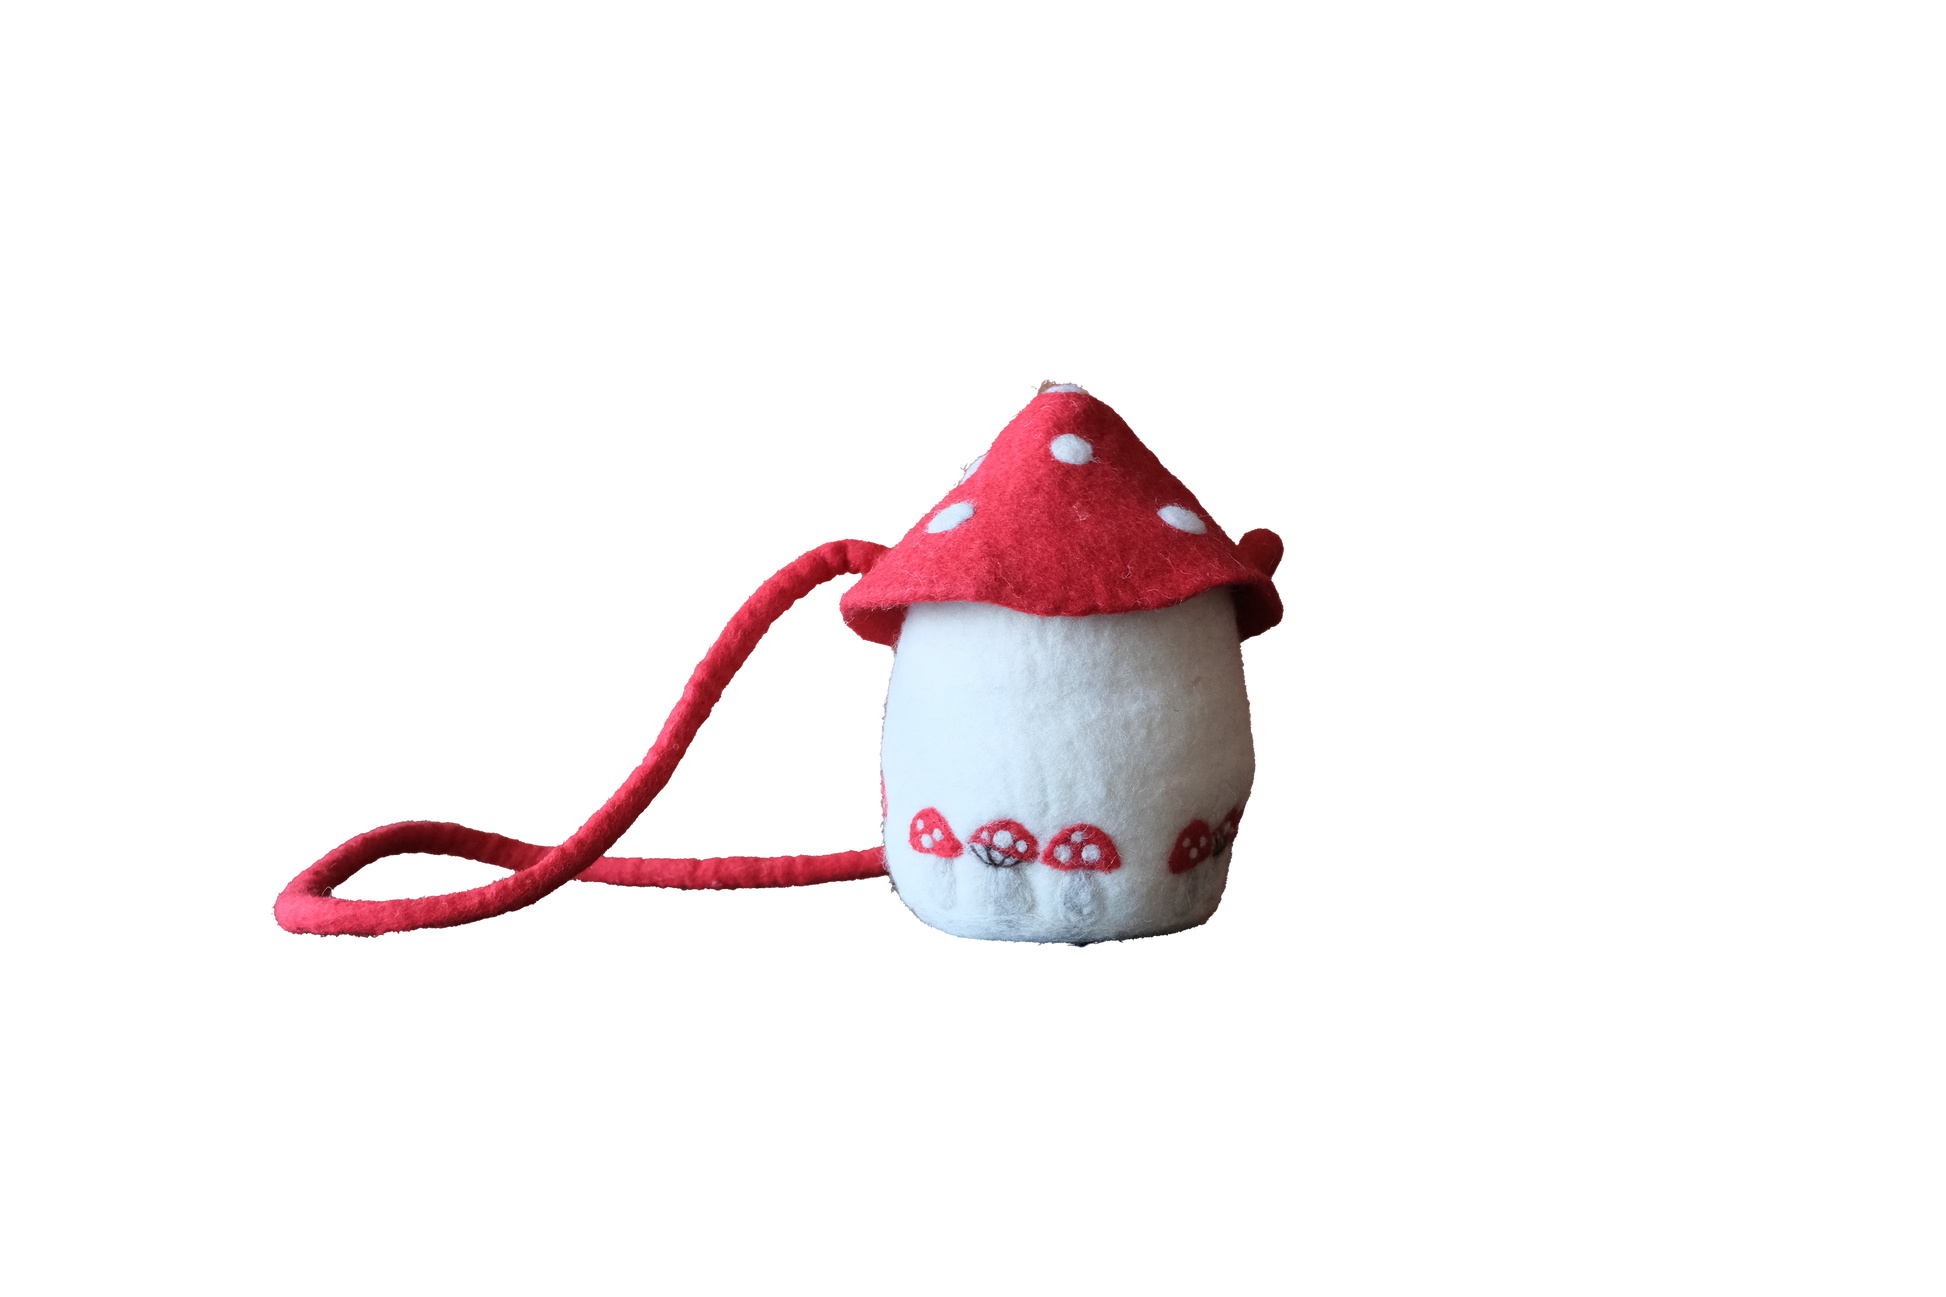 This Global Groove Life, handmade, ethical, fair trade, eco-friendly, sustainable, New Zealand Wool Felt, red & white Mushroom Home Felt Tote purse with strap, was created by artisans in Kathmandu Nepal 